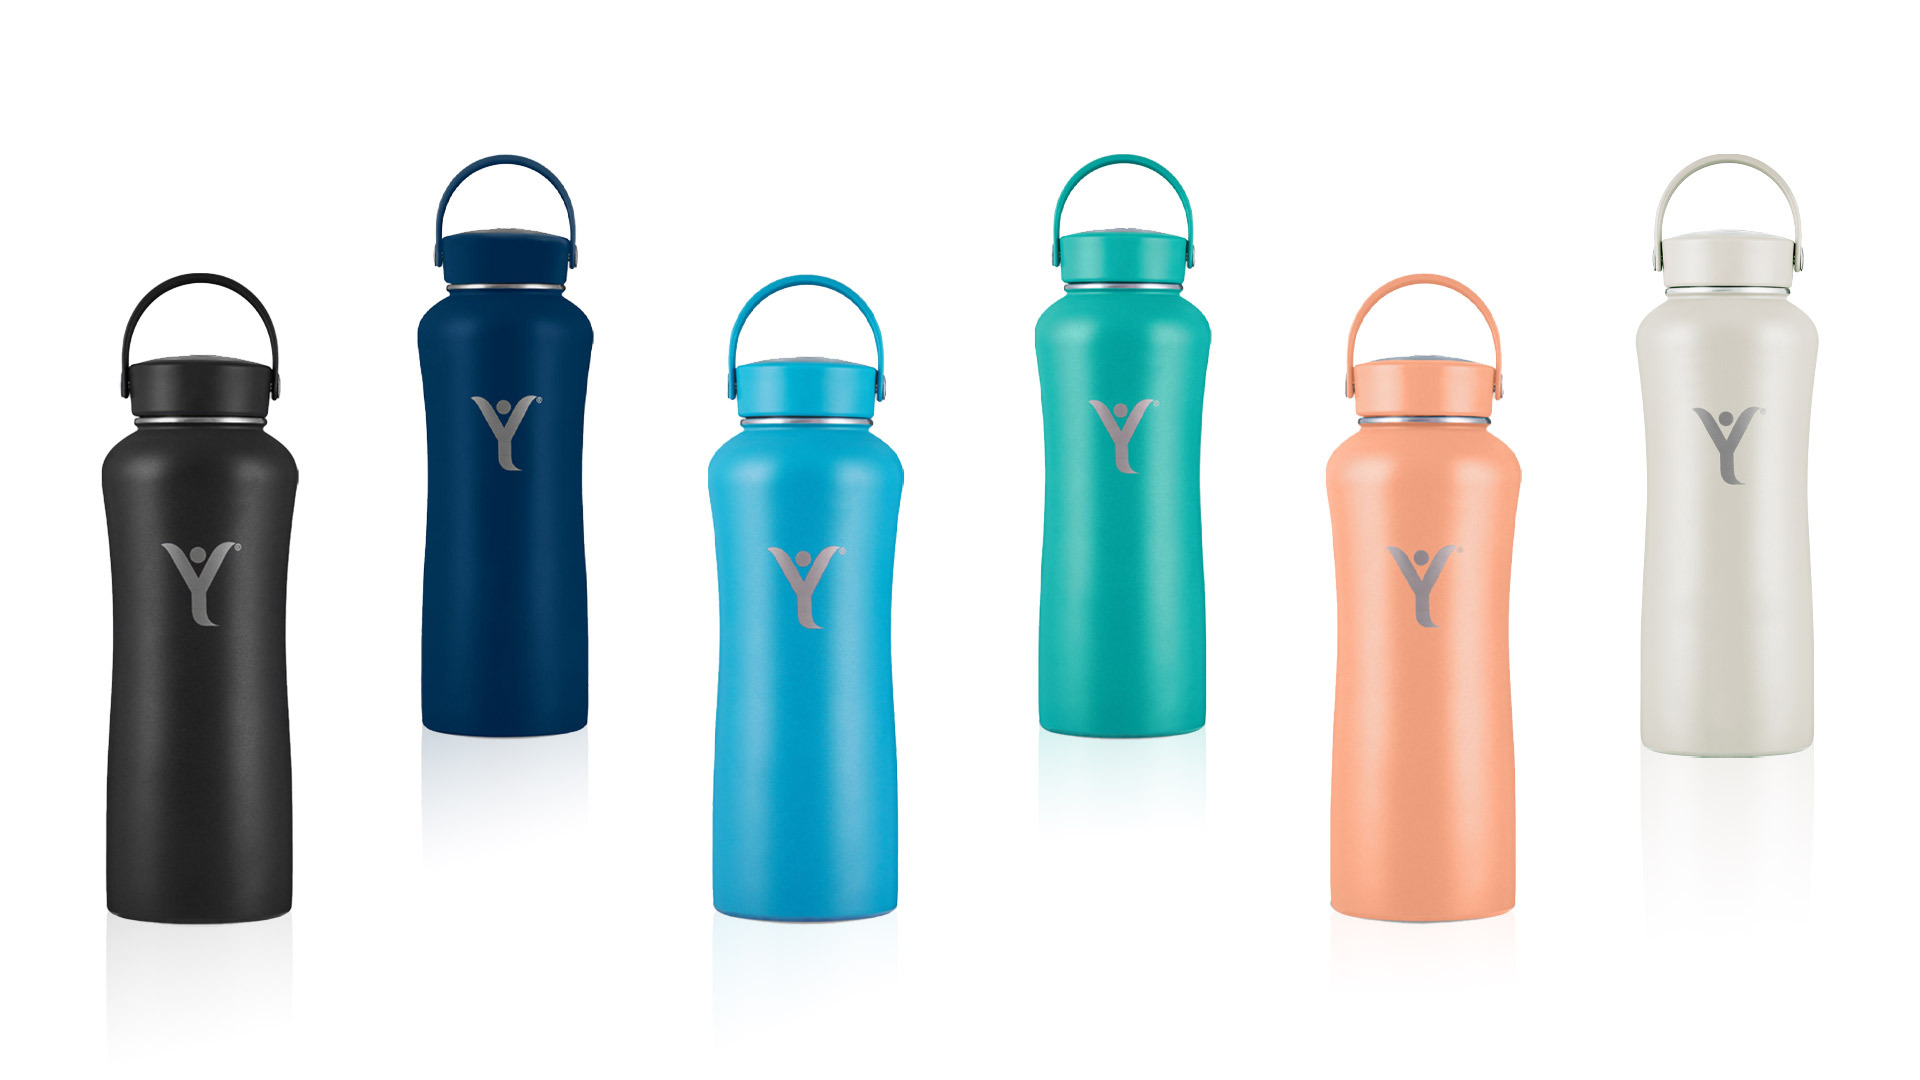 Creates Premium Alkaline Water On-The-Go DYLN Insulated Water Bottle Aqua Teal 950 mL Keeps Cold for 24 Hours Wide Mouth Cap Vacuum Insulated Stainless Steel 32 oz